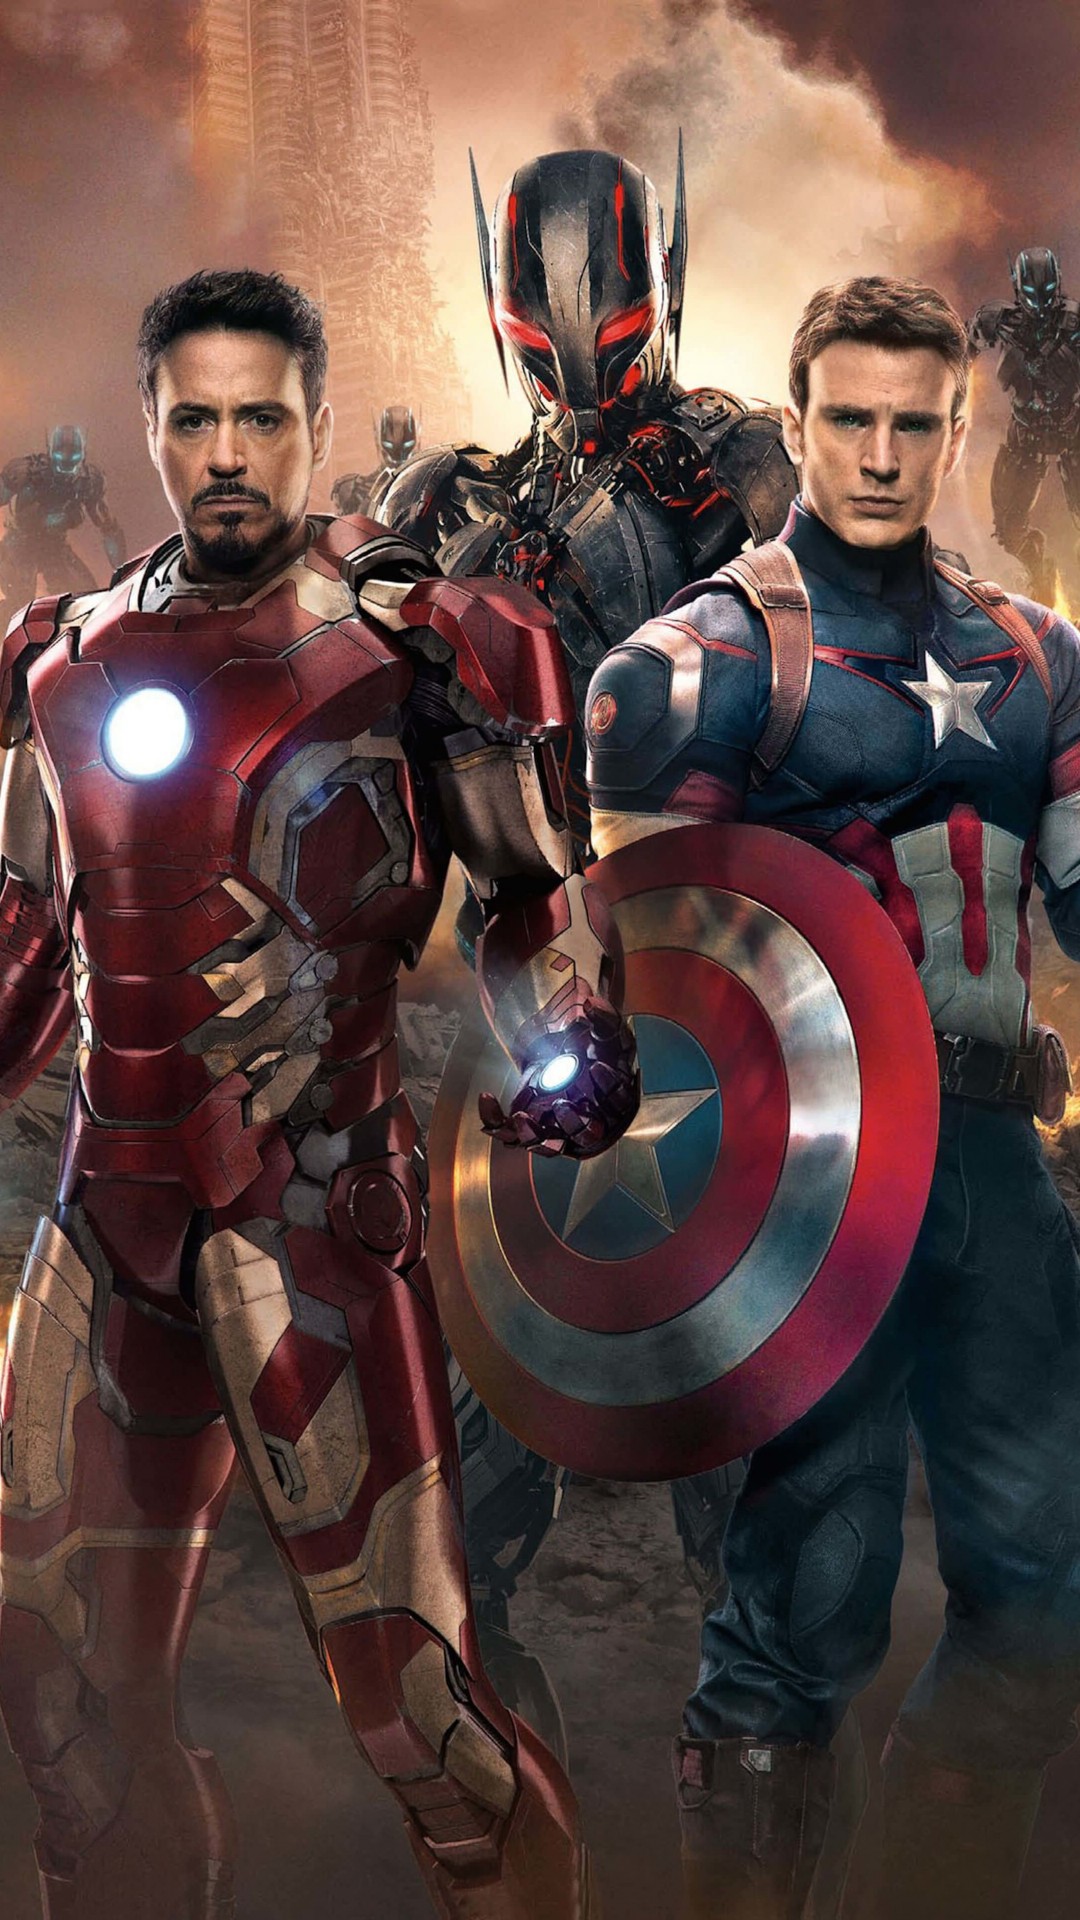 The Avengers: Age of Ultron - Iron Man and Captain America Wallpaper for HTC One